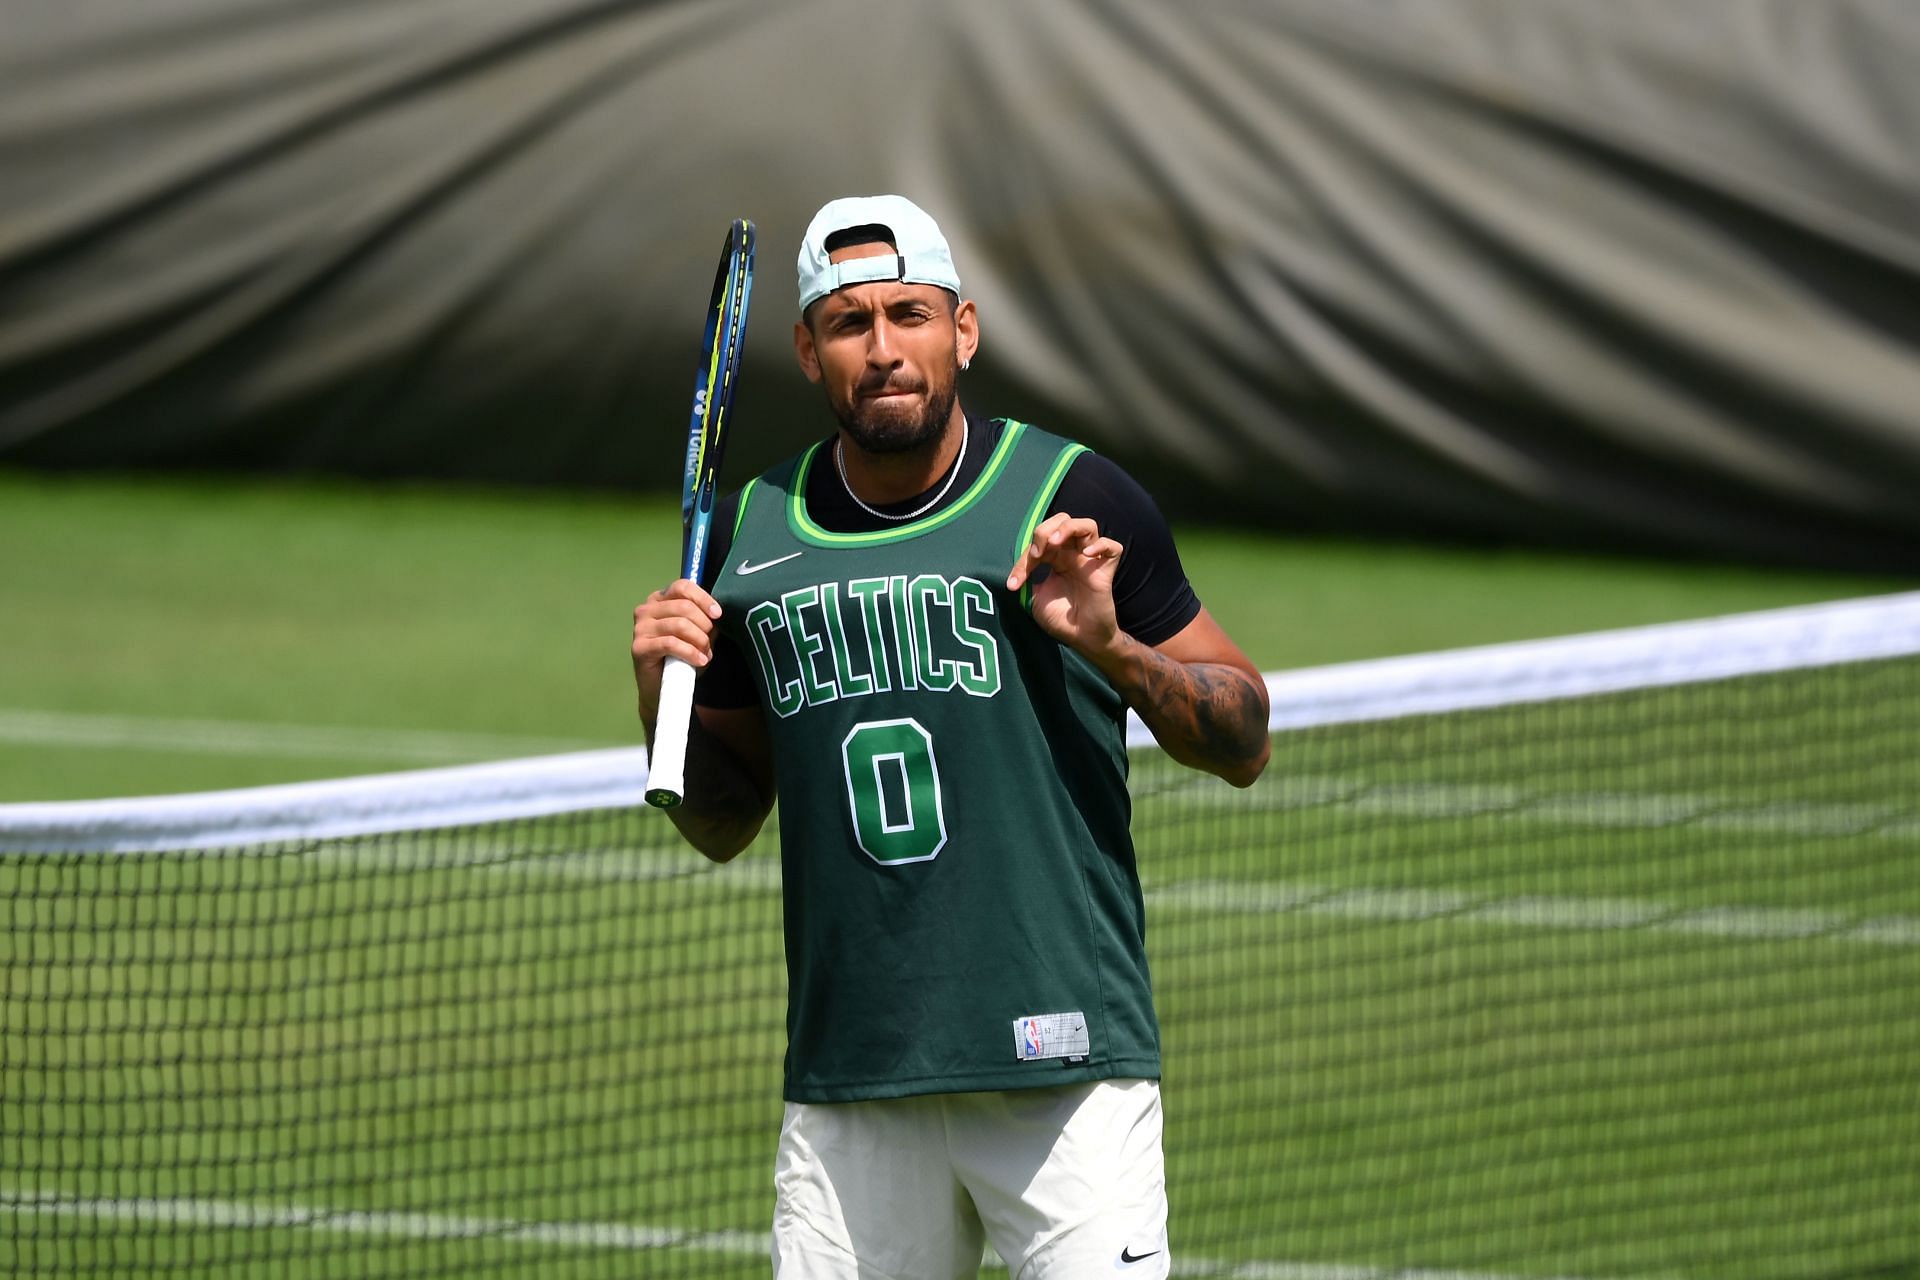 Day Eleven: The Championships - Wimbledon 2022 - Nick Krygios